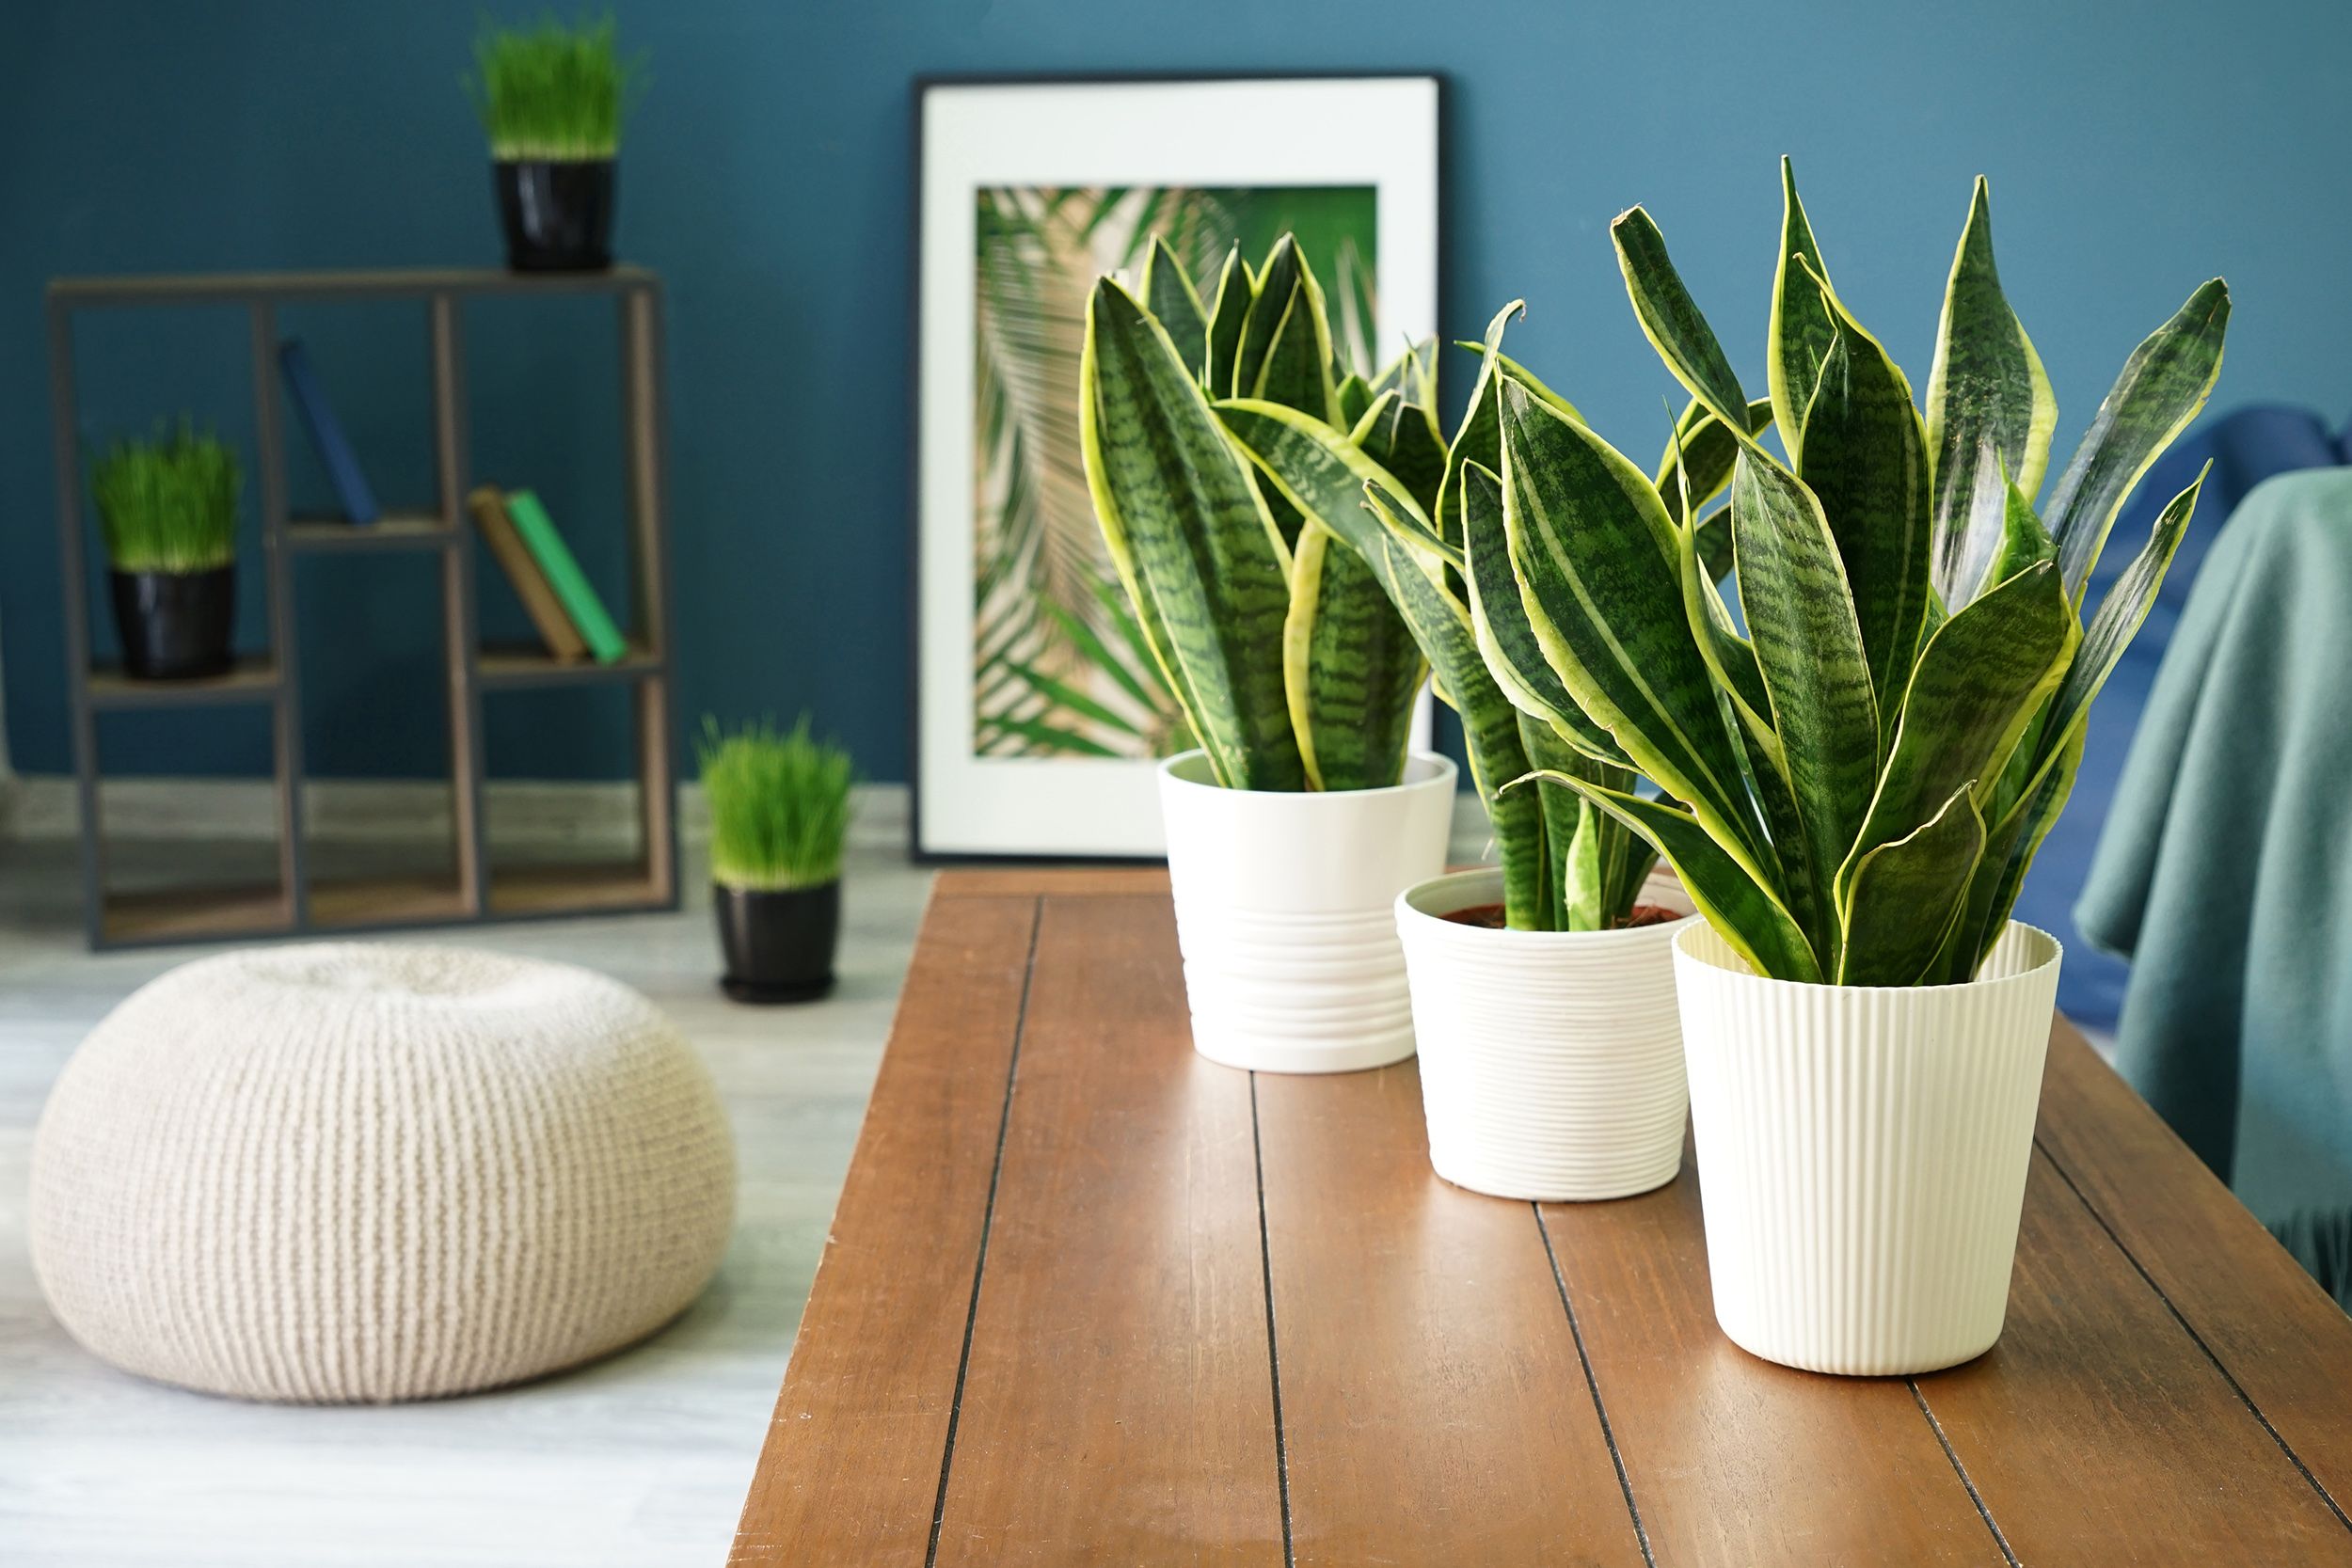 Air Purifying Indoor Plants